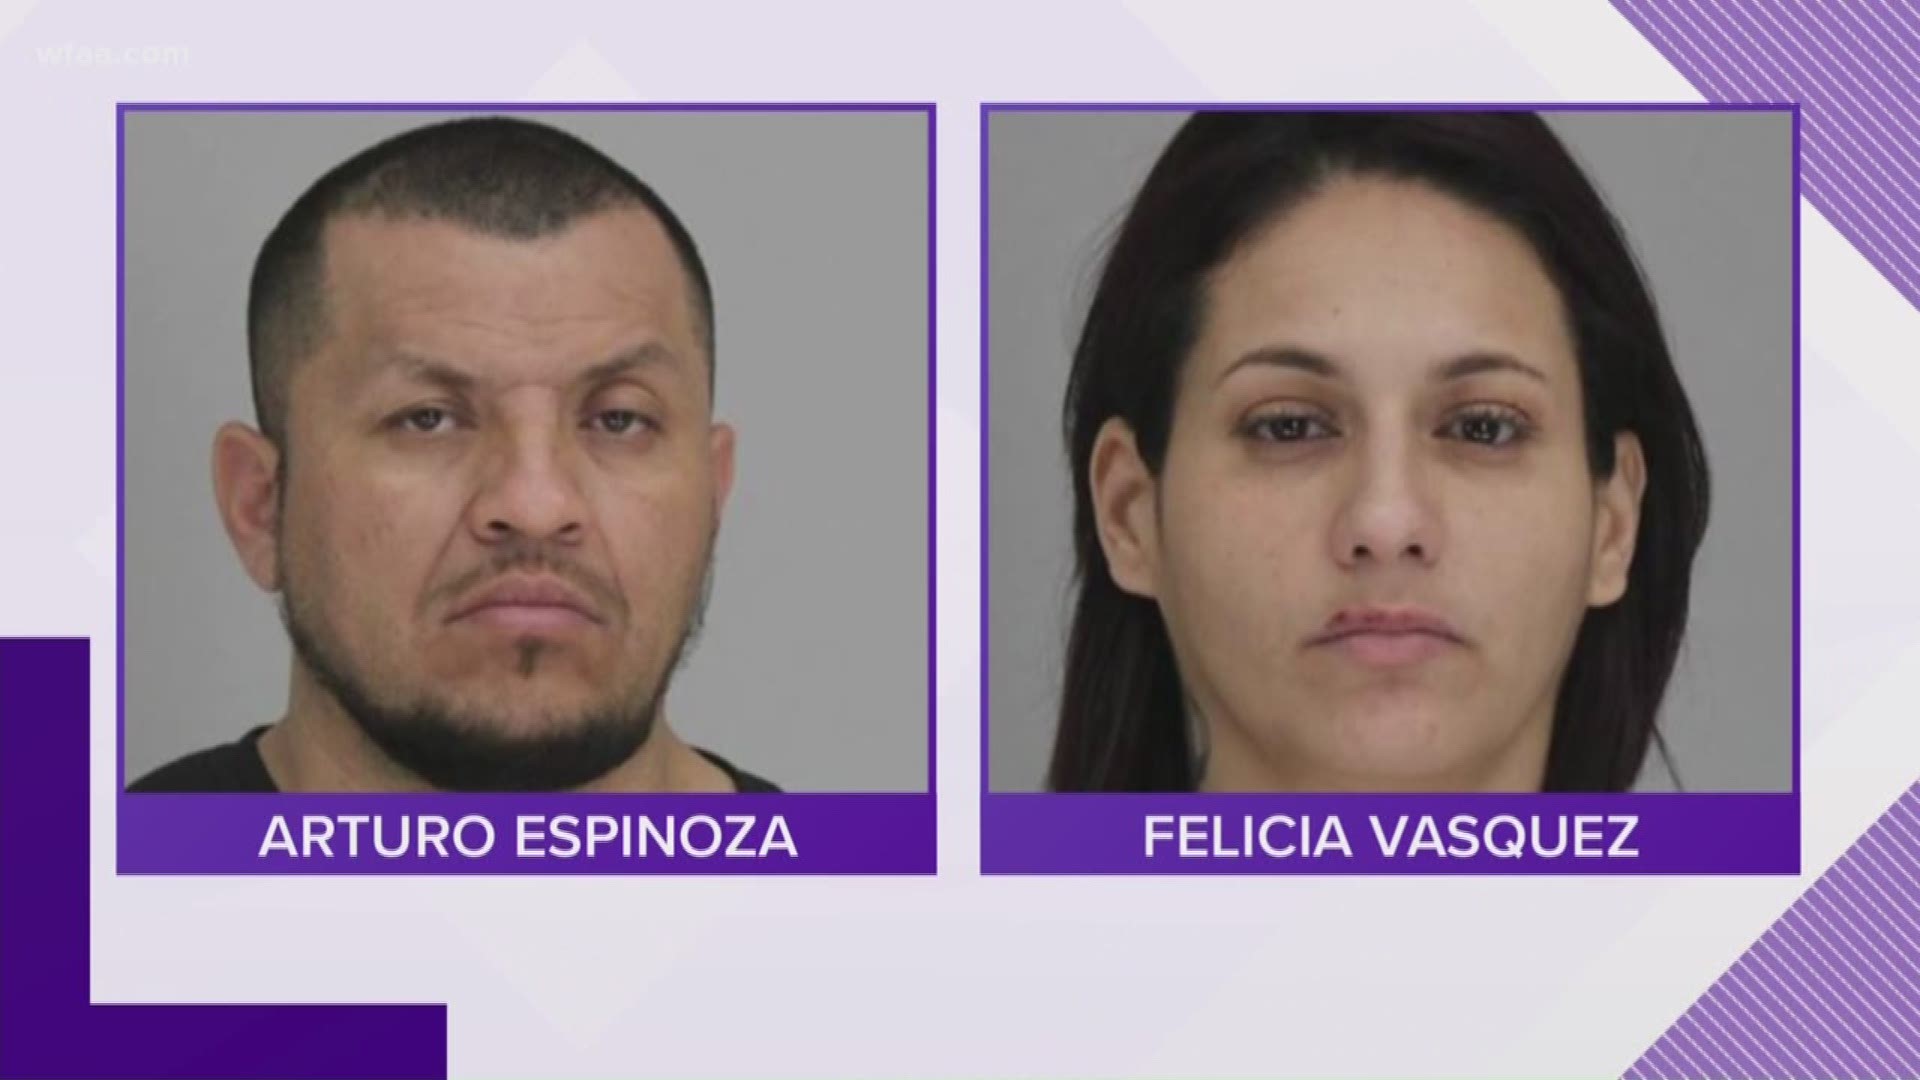 Arturo Espinoza, 37, and Felicia Vasquez, 32, each face a felony charge of tampering with physical evidence.